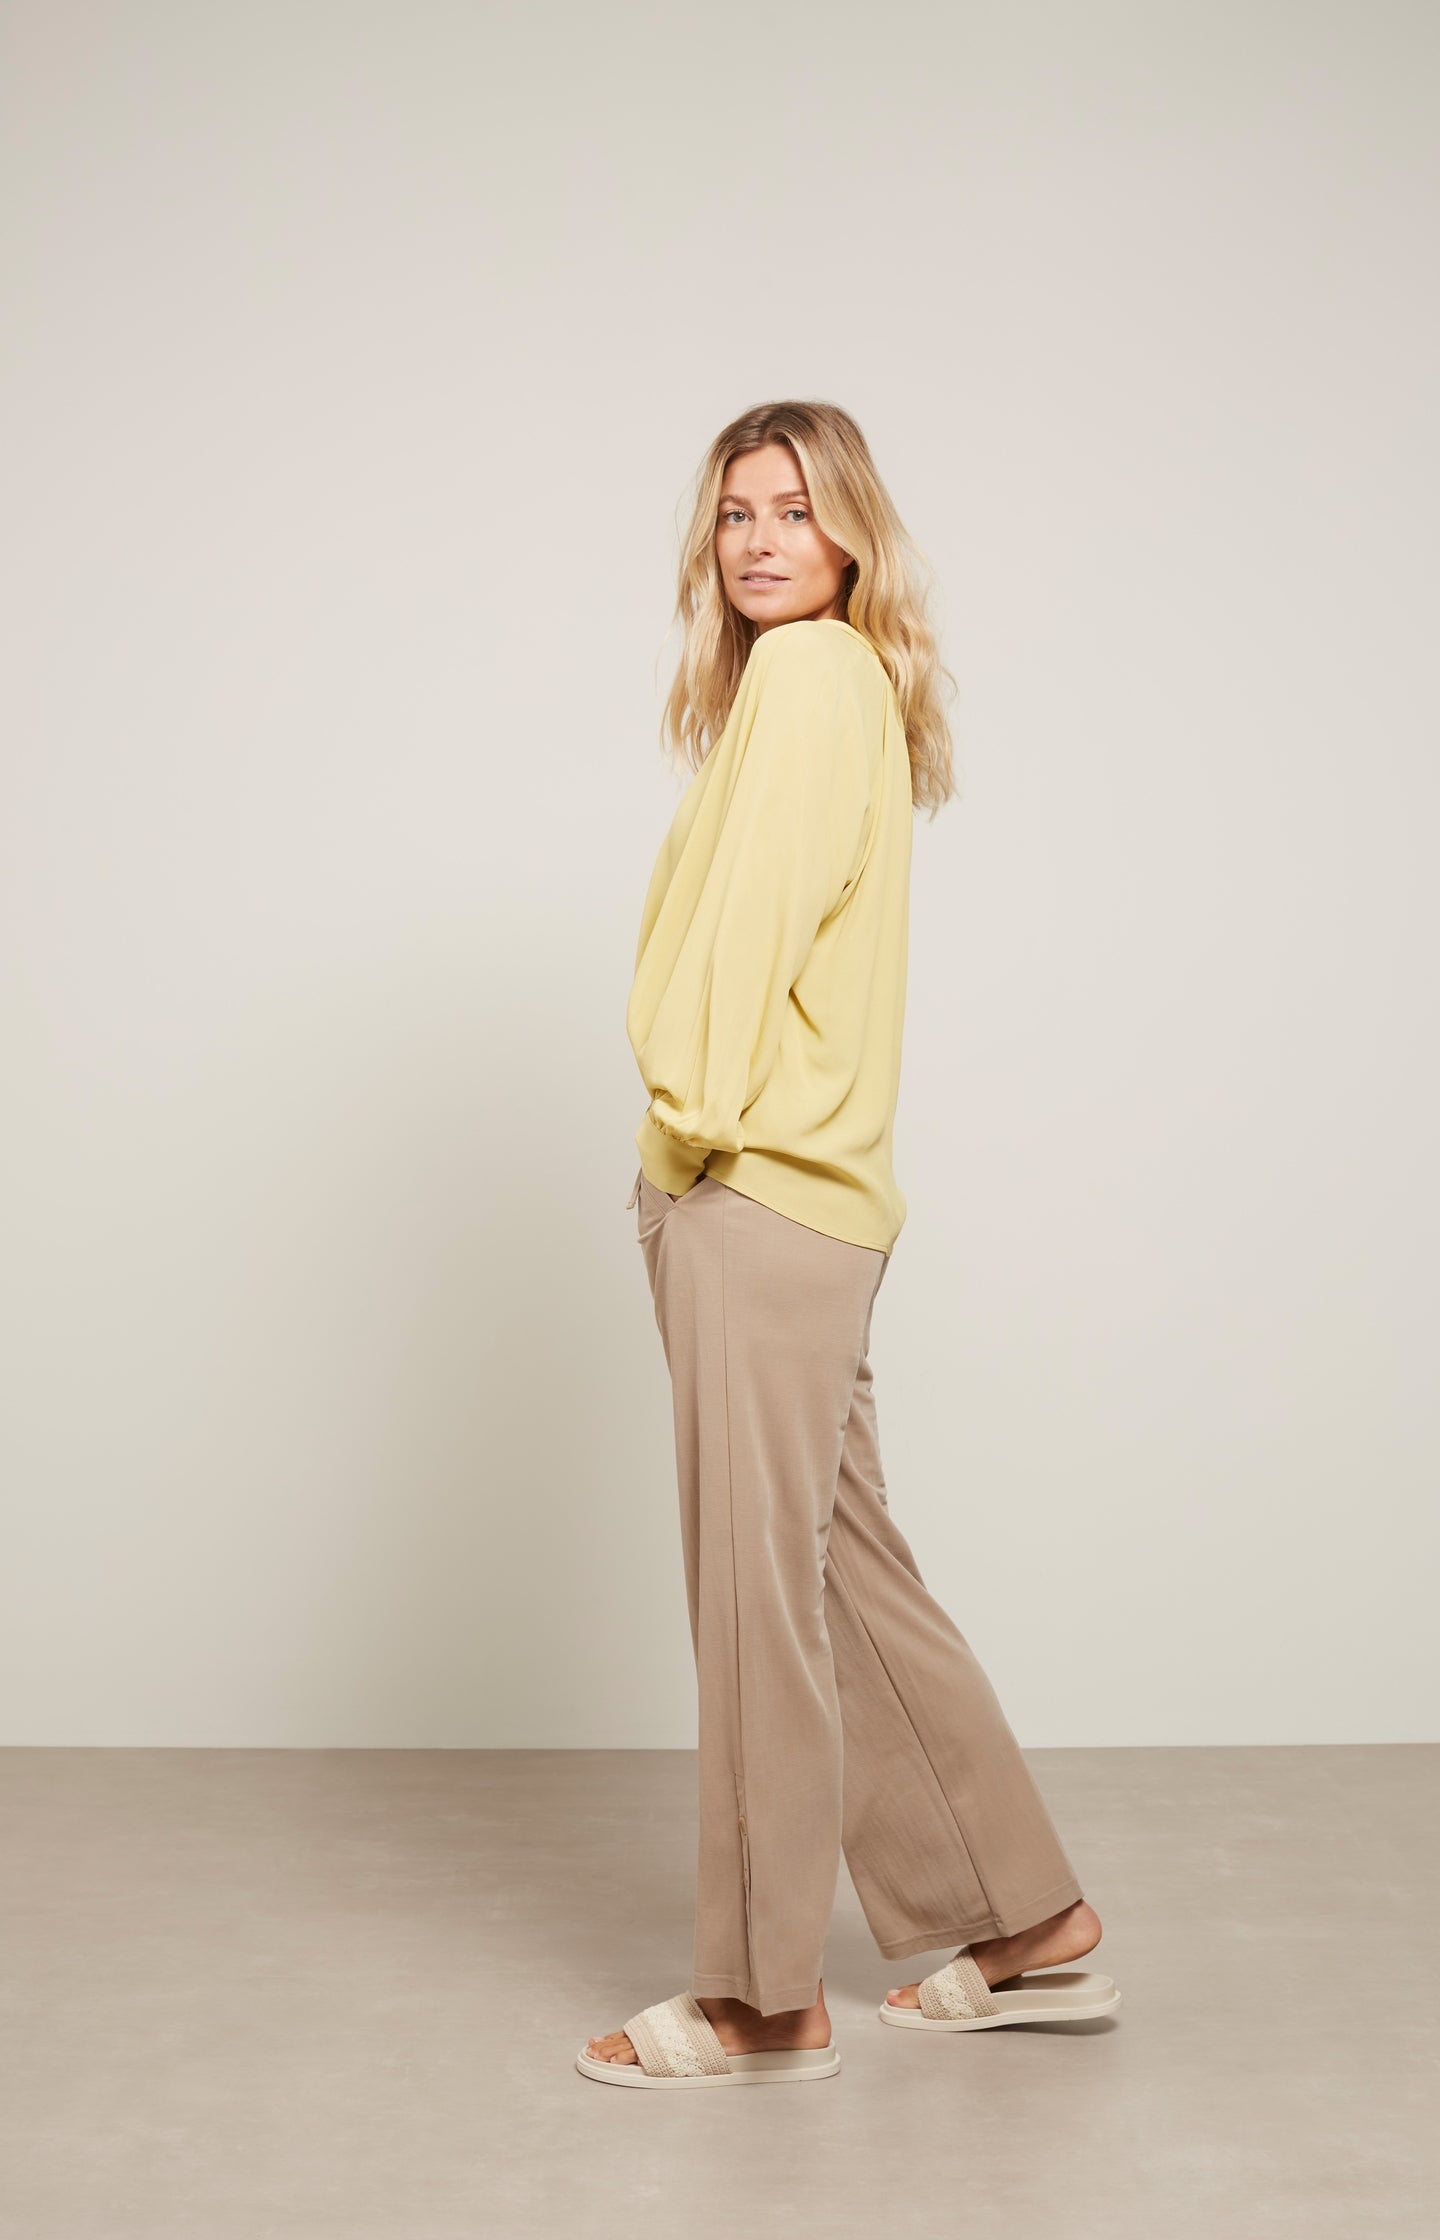 Top with V-neck, long balloon sleeves and pleated details - Type: lookbook